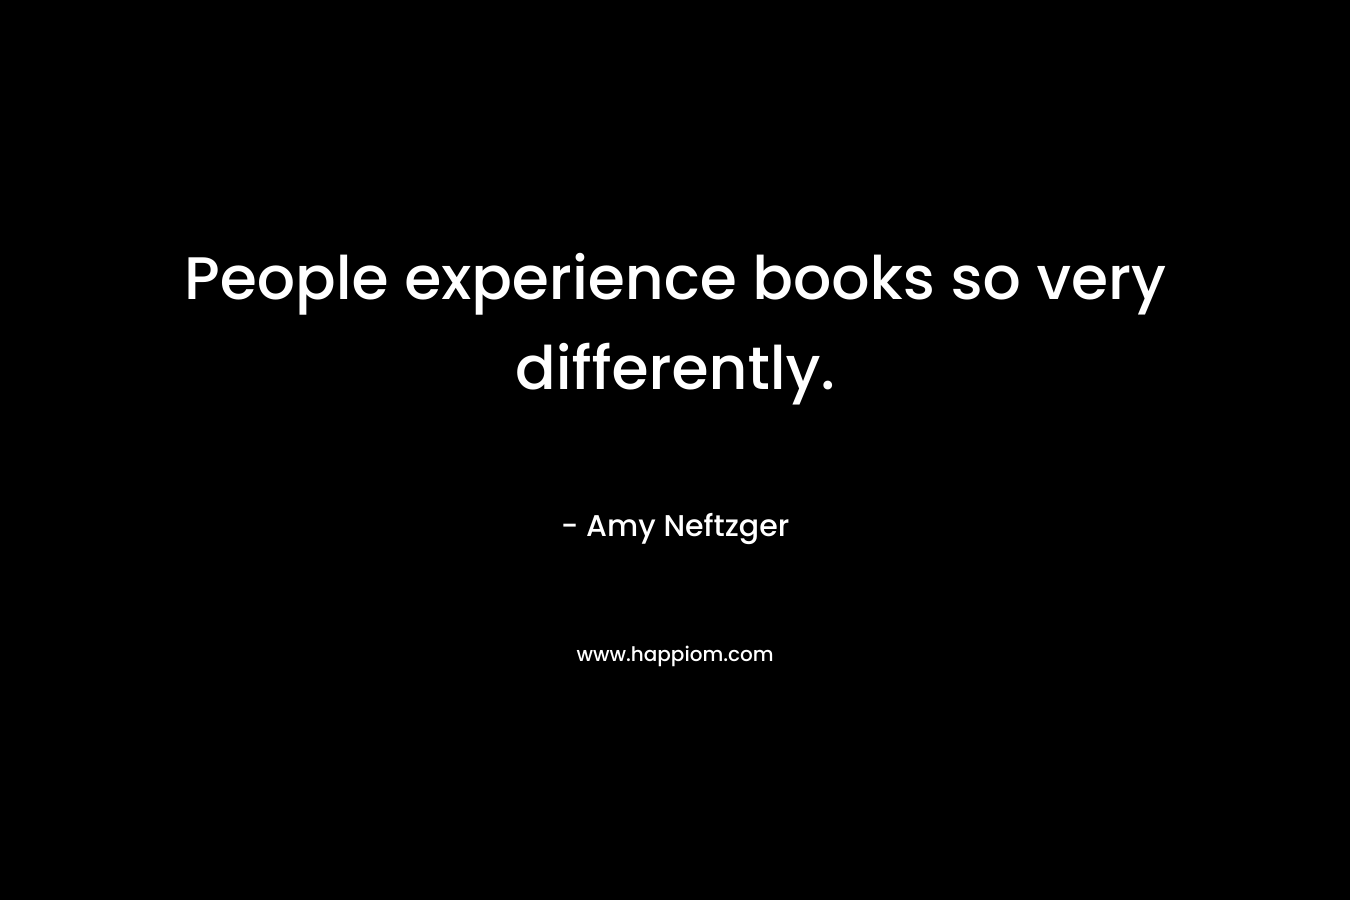 People experience books so very differently.